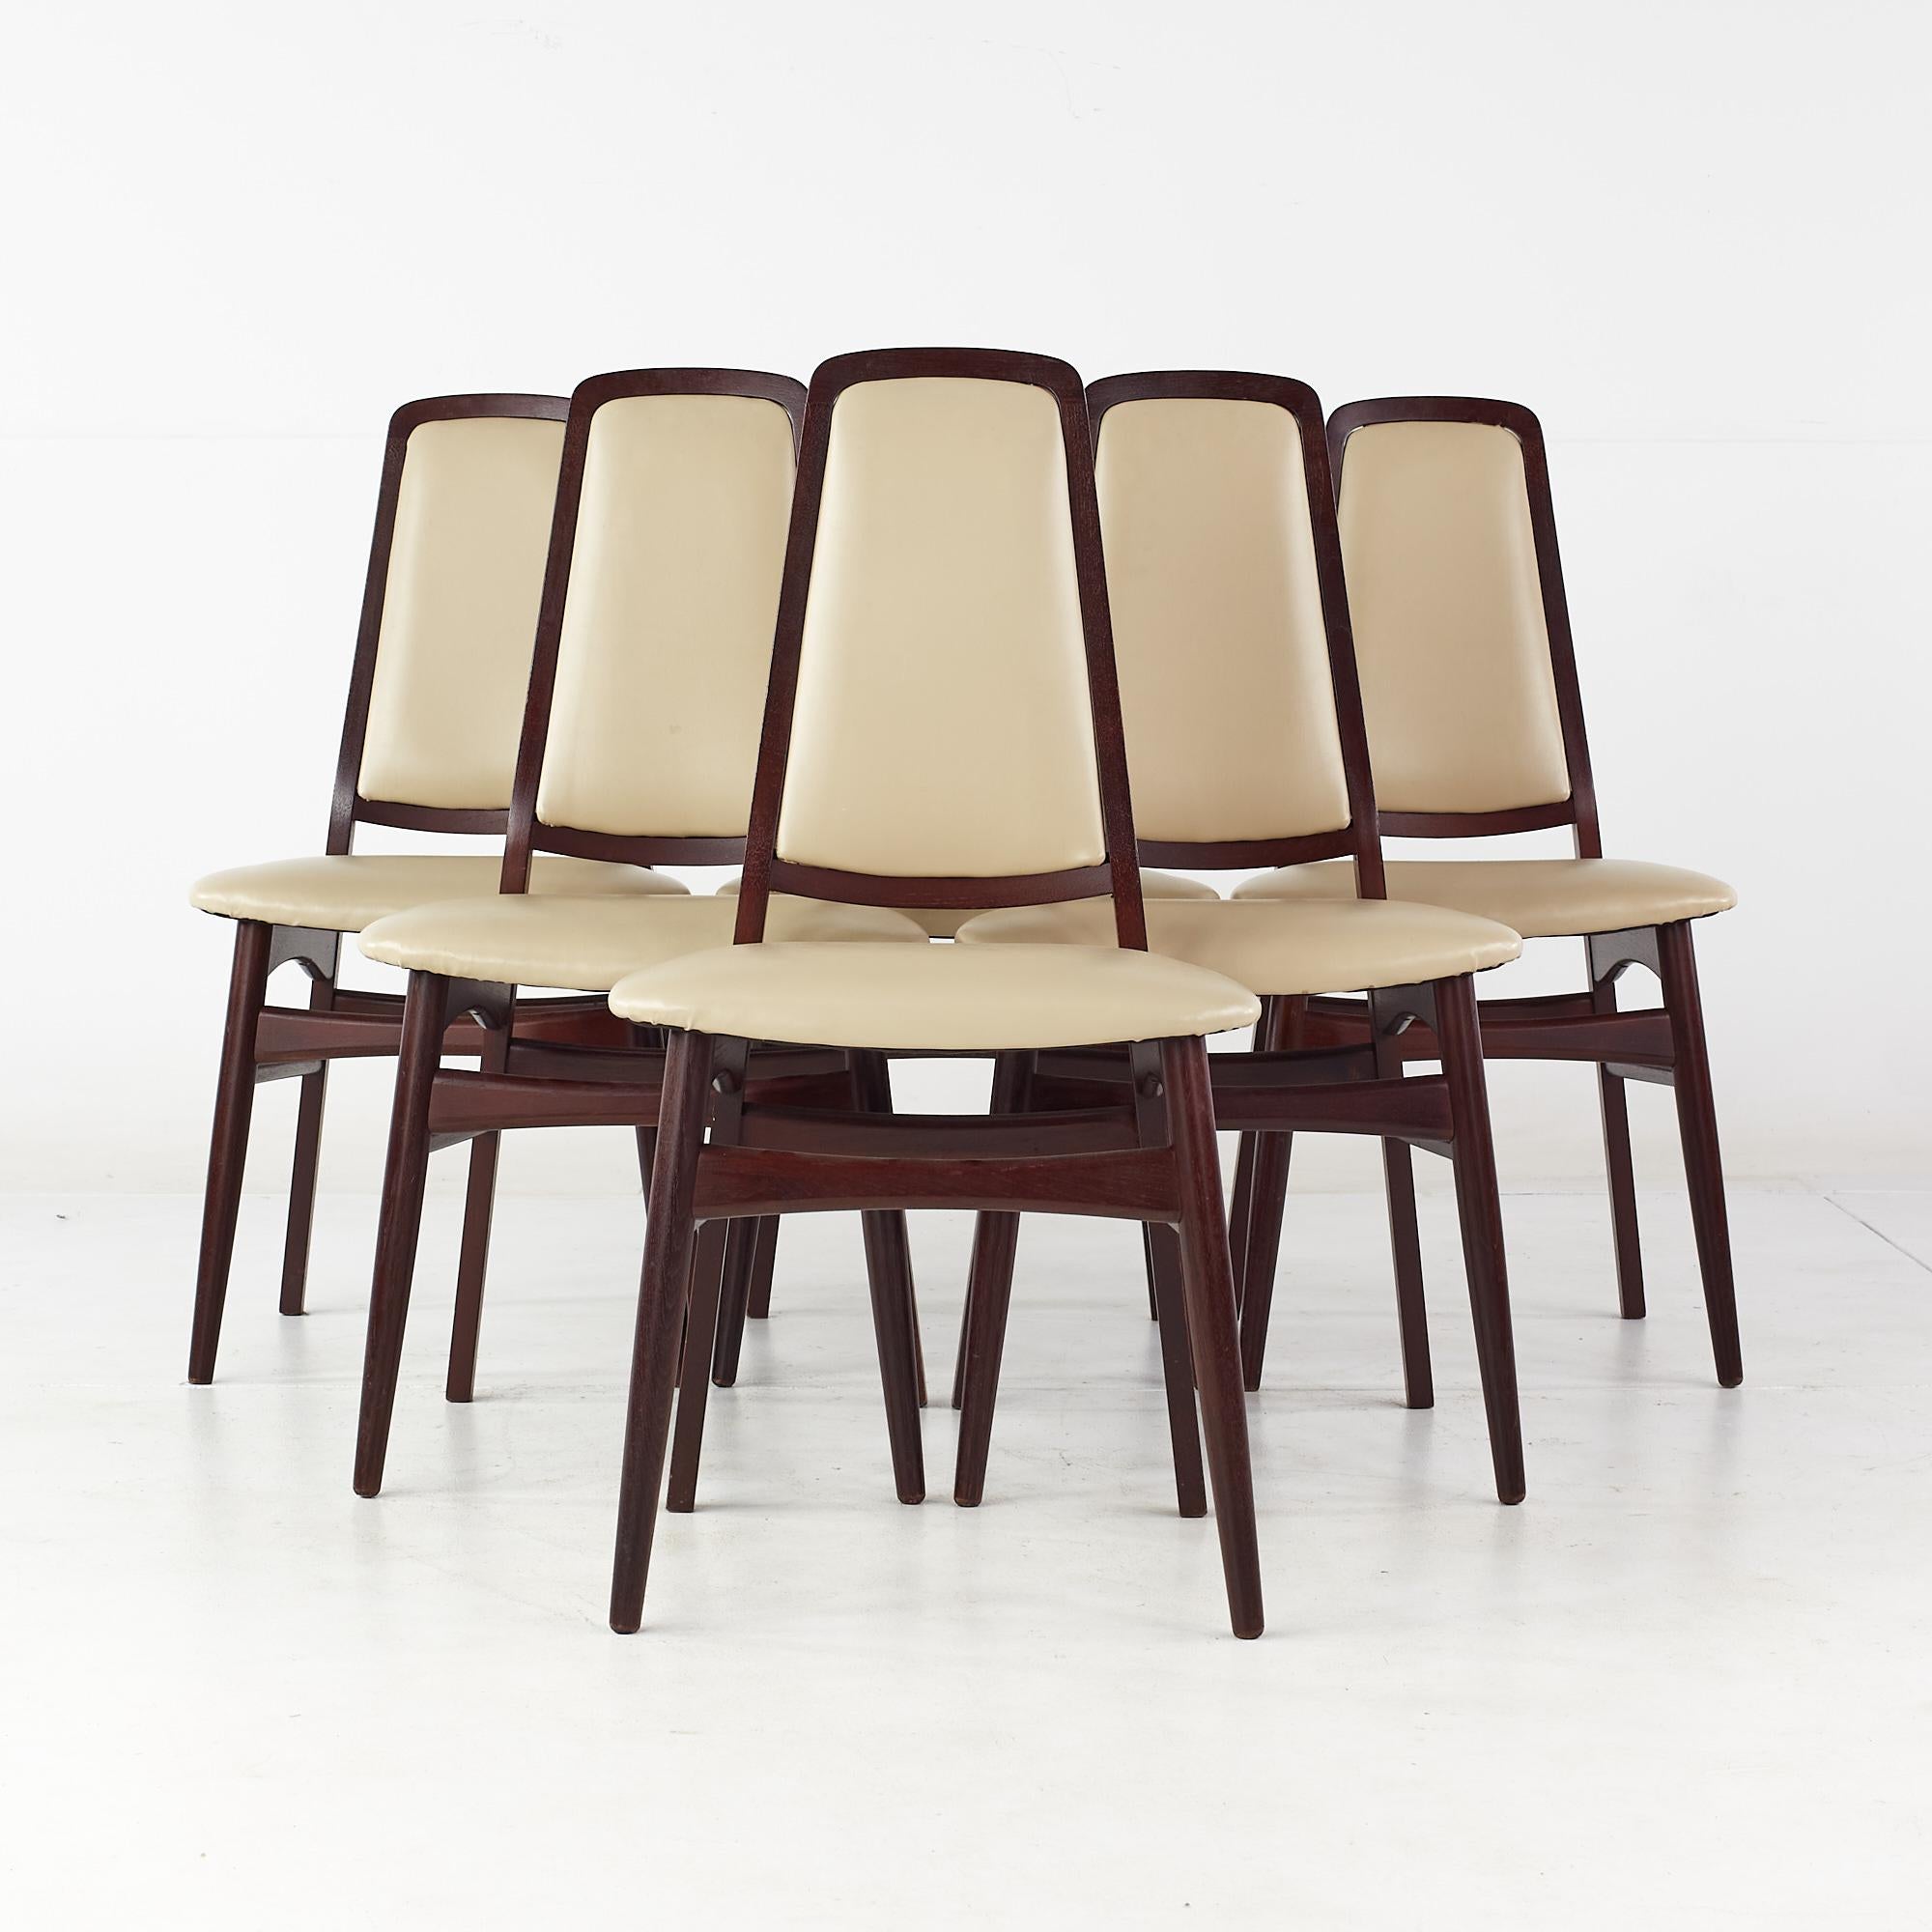 Dyrlund style mid century rosewood dining chairs - set of 6.

These chairs measure: 19 wide x 19.5 deep x 38 high, with a seat height of 19 inches.

All pieces of furniture can be had in what we call restored vintage condition. That means the